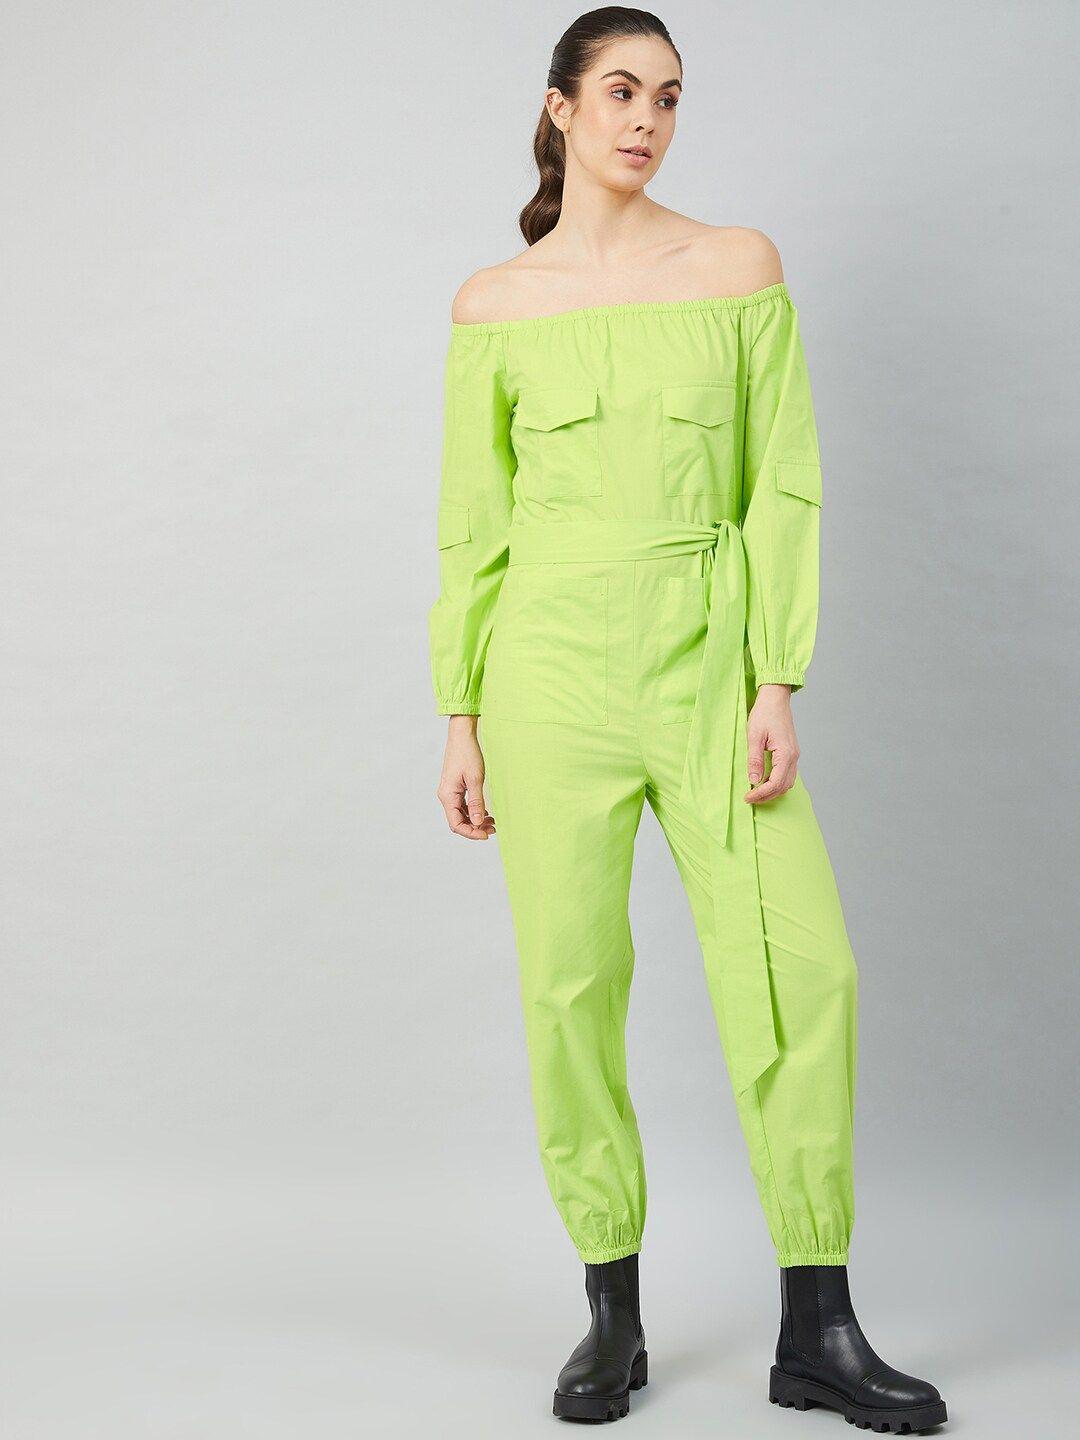 athena women lime green solid cotton jumpsuit